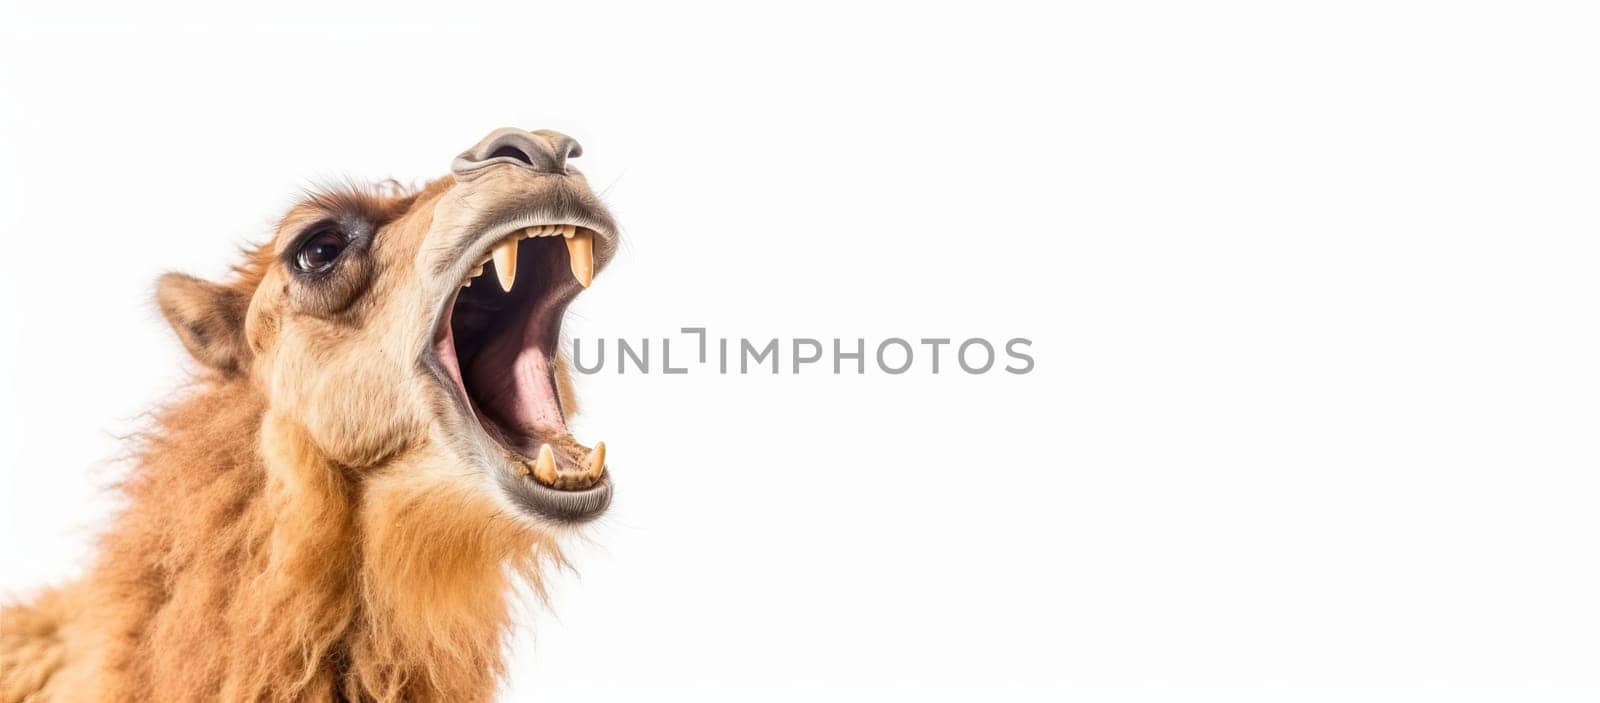 Camel screaming face banner image. Outdoor animal. Generate Ai